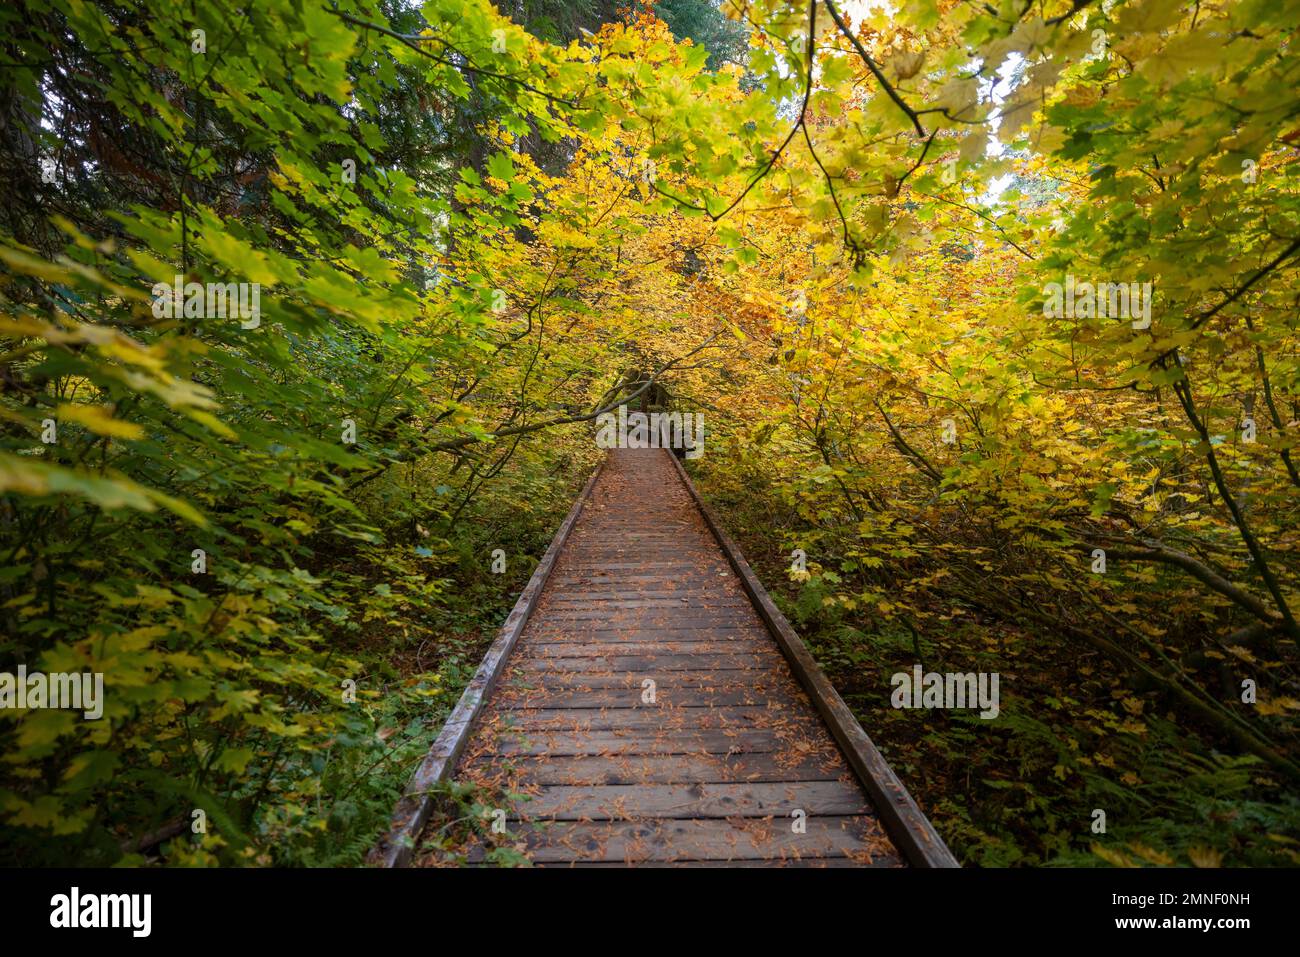 Wooden trail in autumnal forest, Grove of the Patriarchs Trail, Mount Rainier National Park, Washington, USA Stock Photo